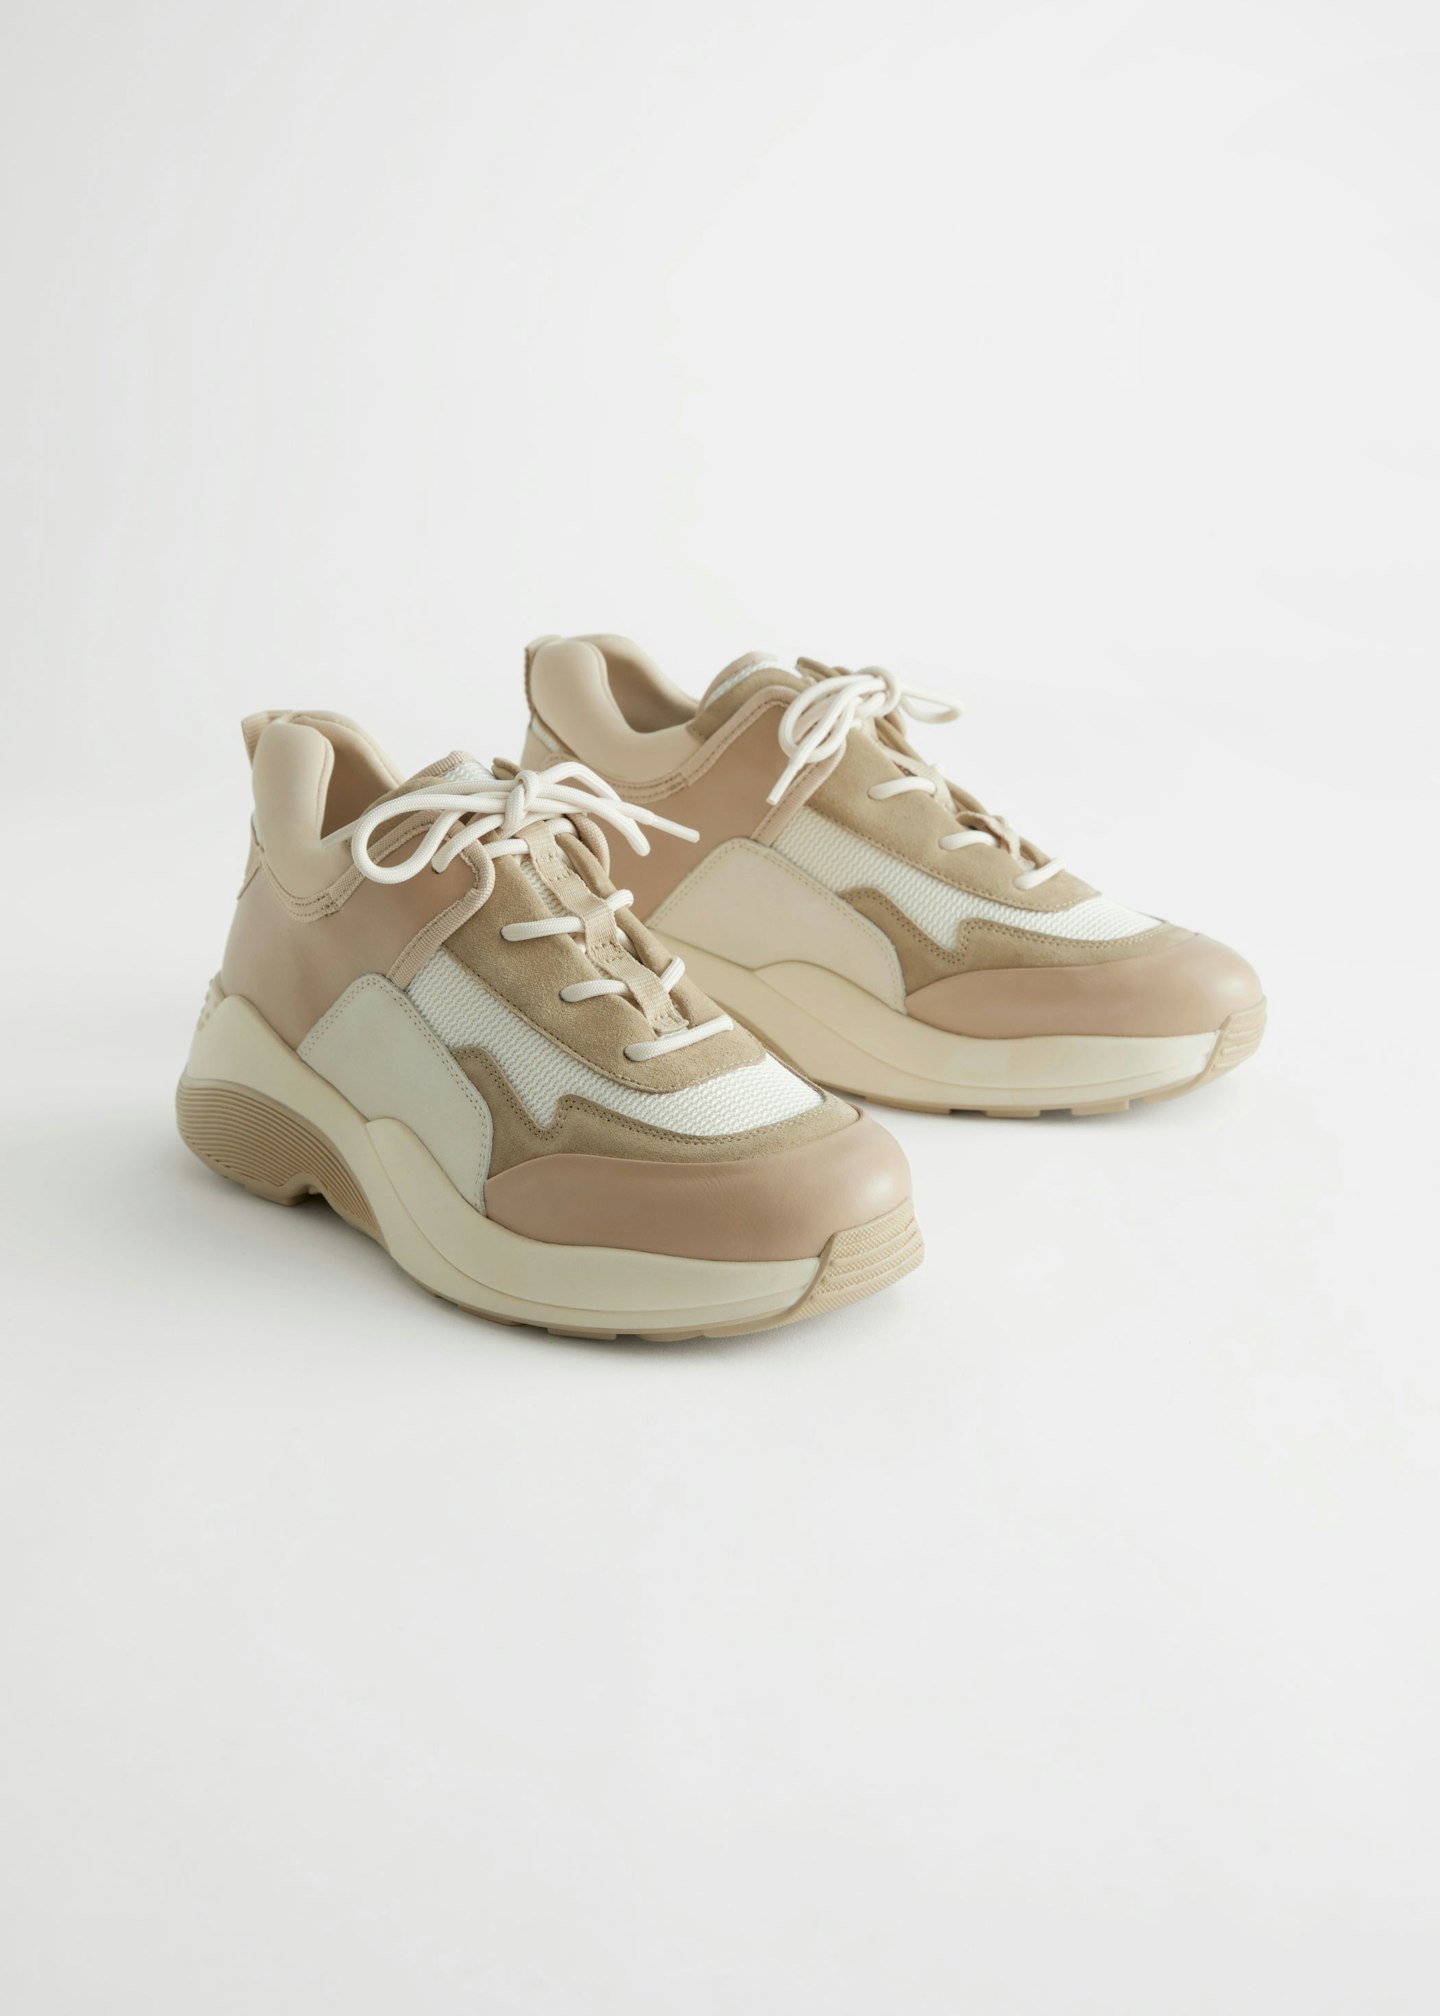 & Other Stories, Chunky Sole Technical Sneakers, £95